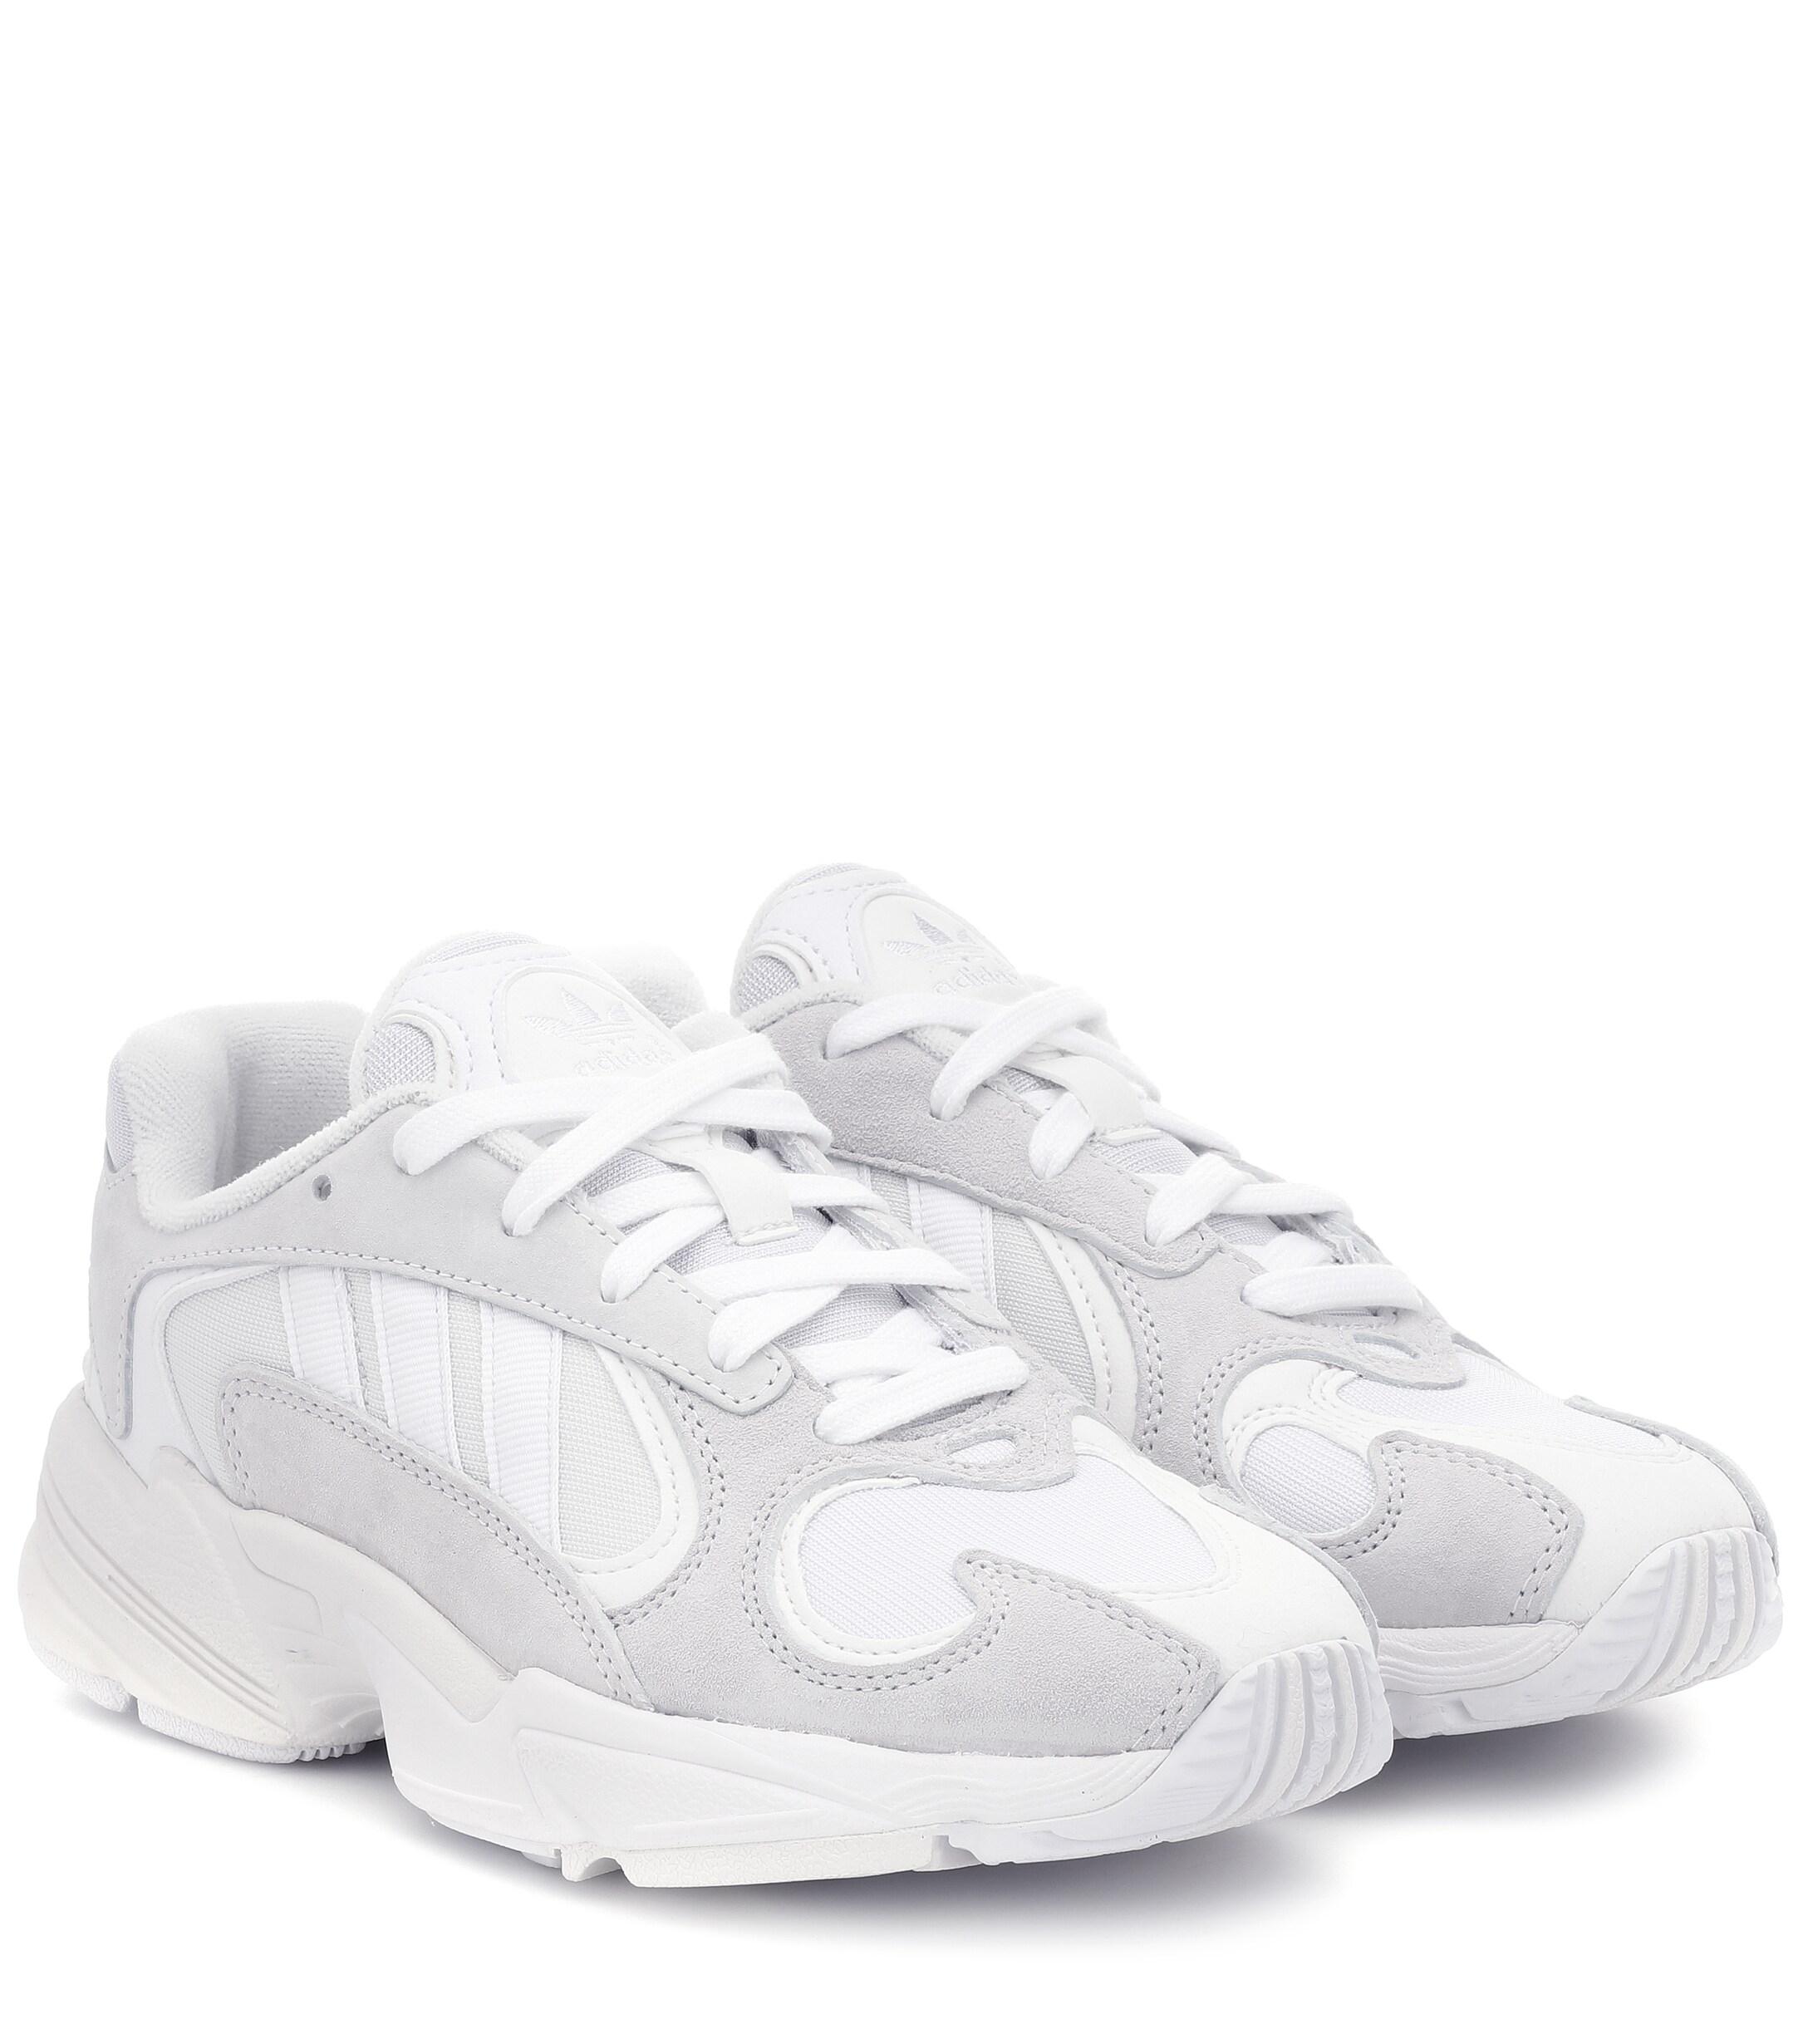 adidas Yung-1 Suede Sneakers in White | Lyst شنط كبلنج